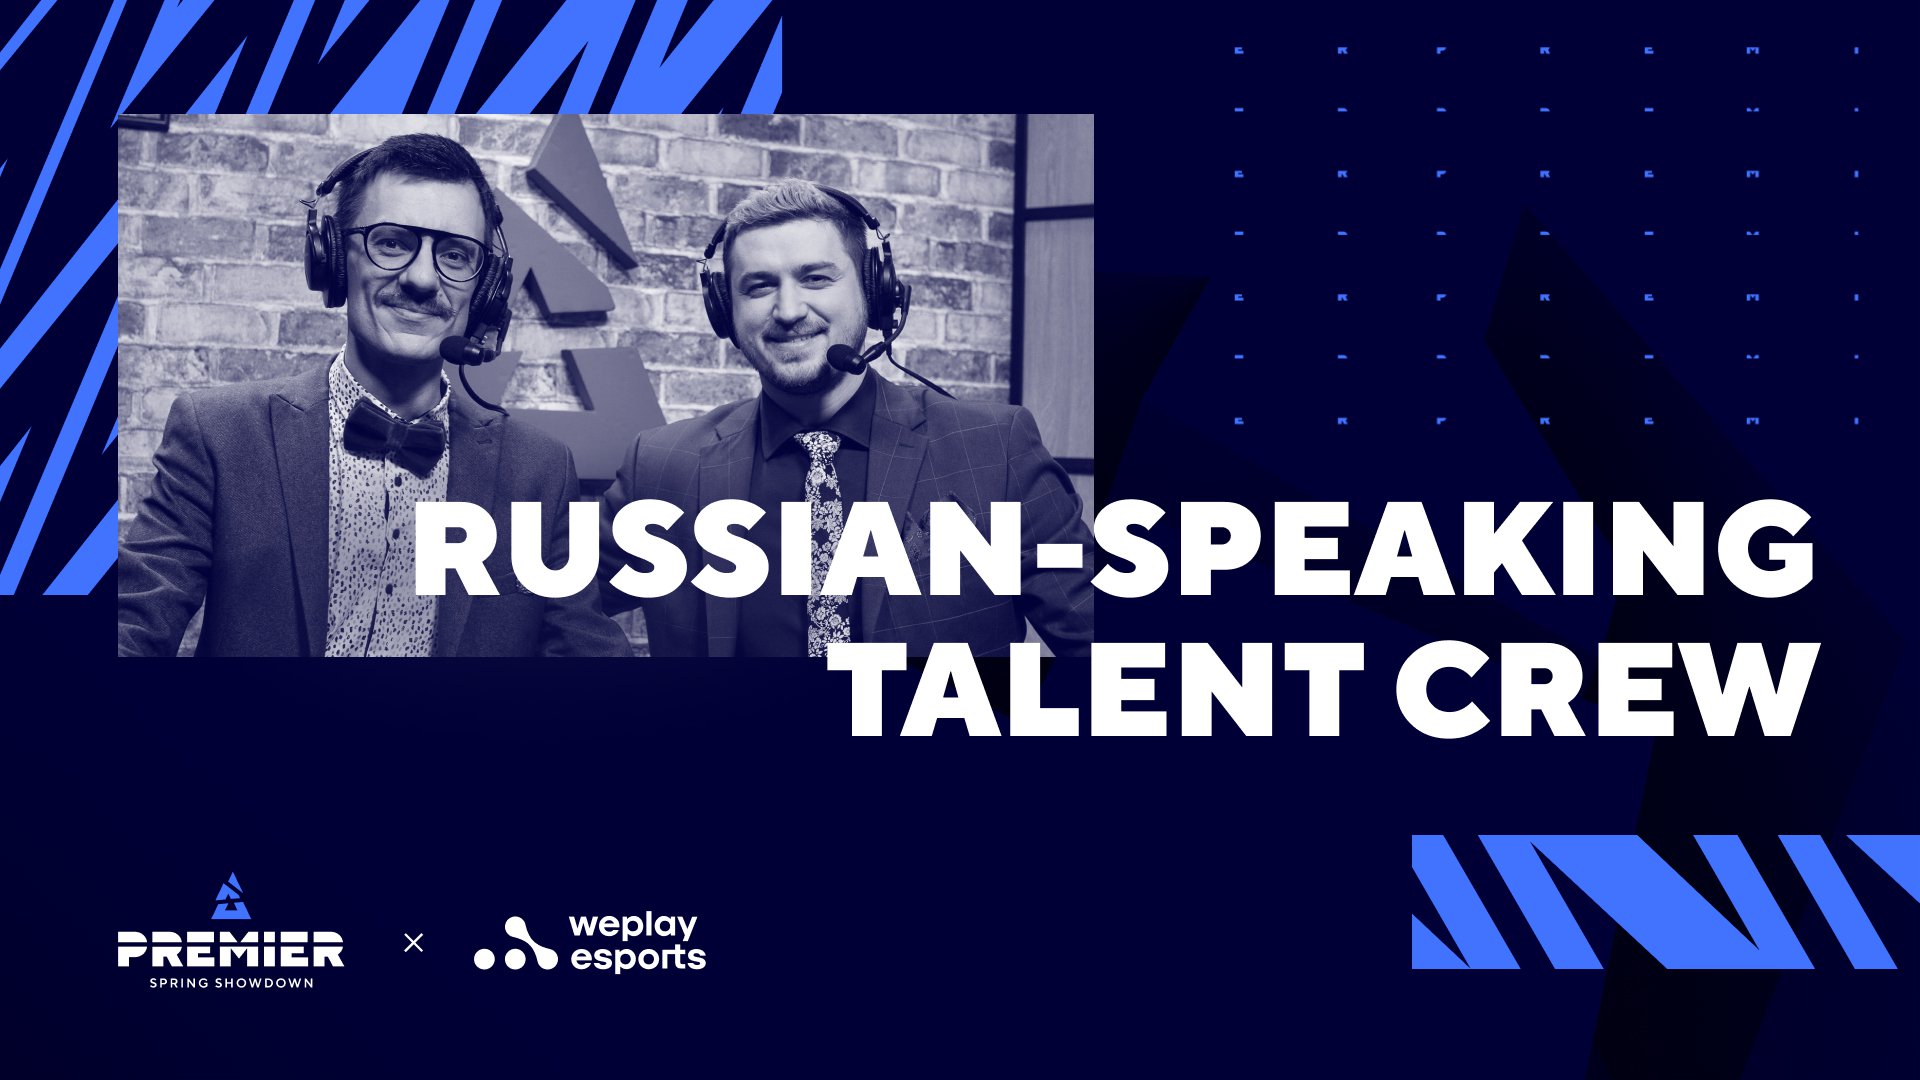 BLAST Premier: Fall Final 2021 Russian-speaking talent crew announced. Image: WePlay Holding